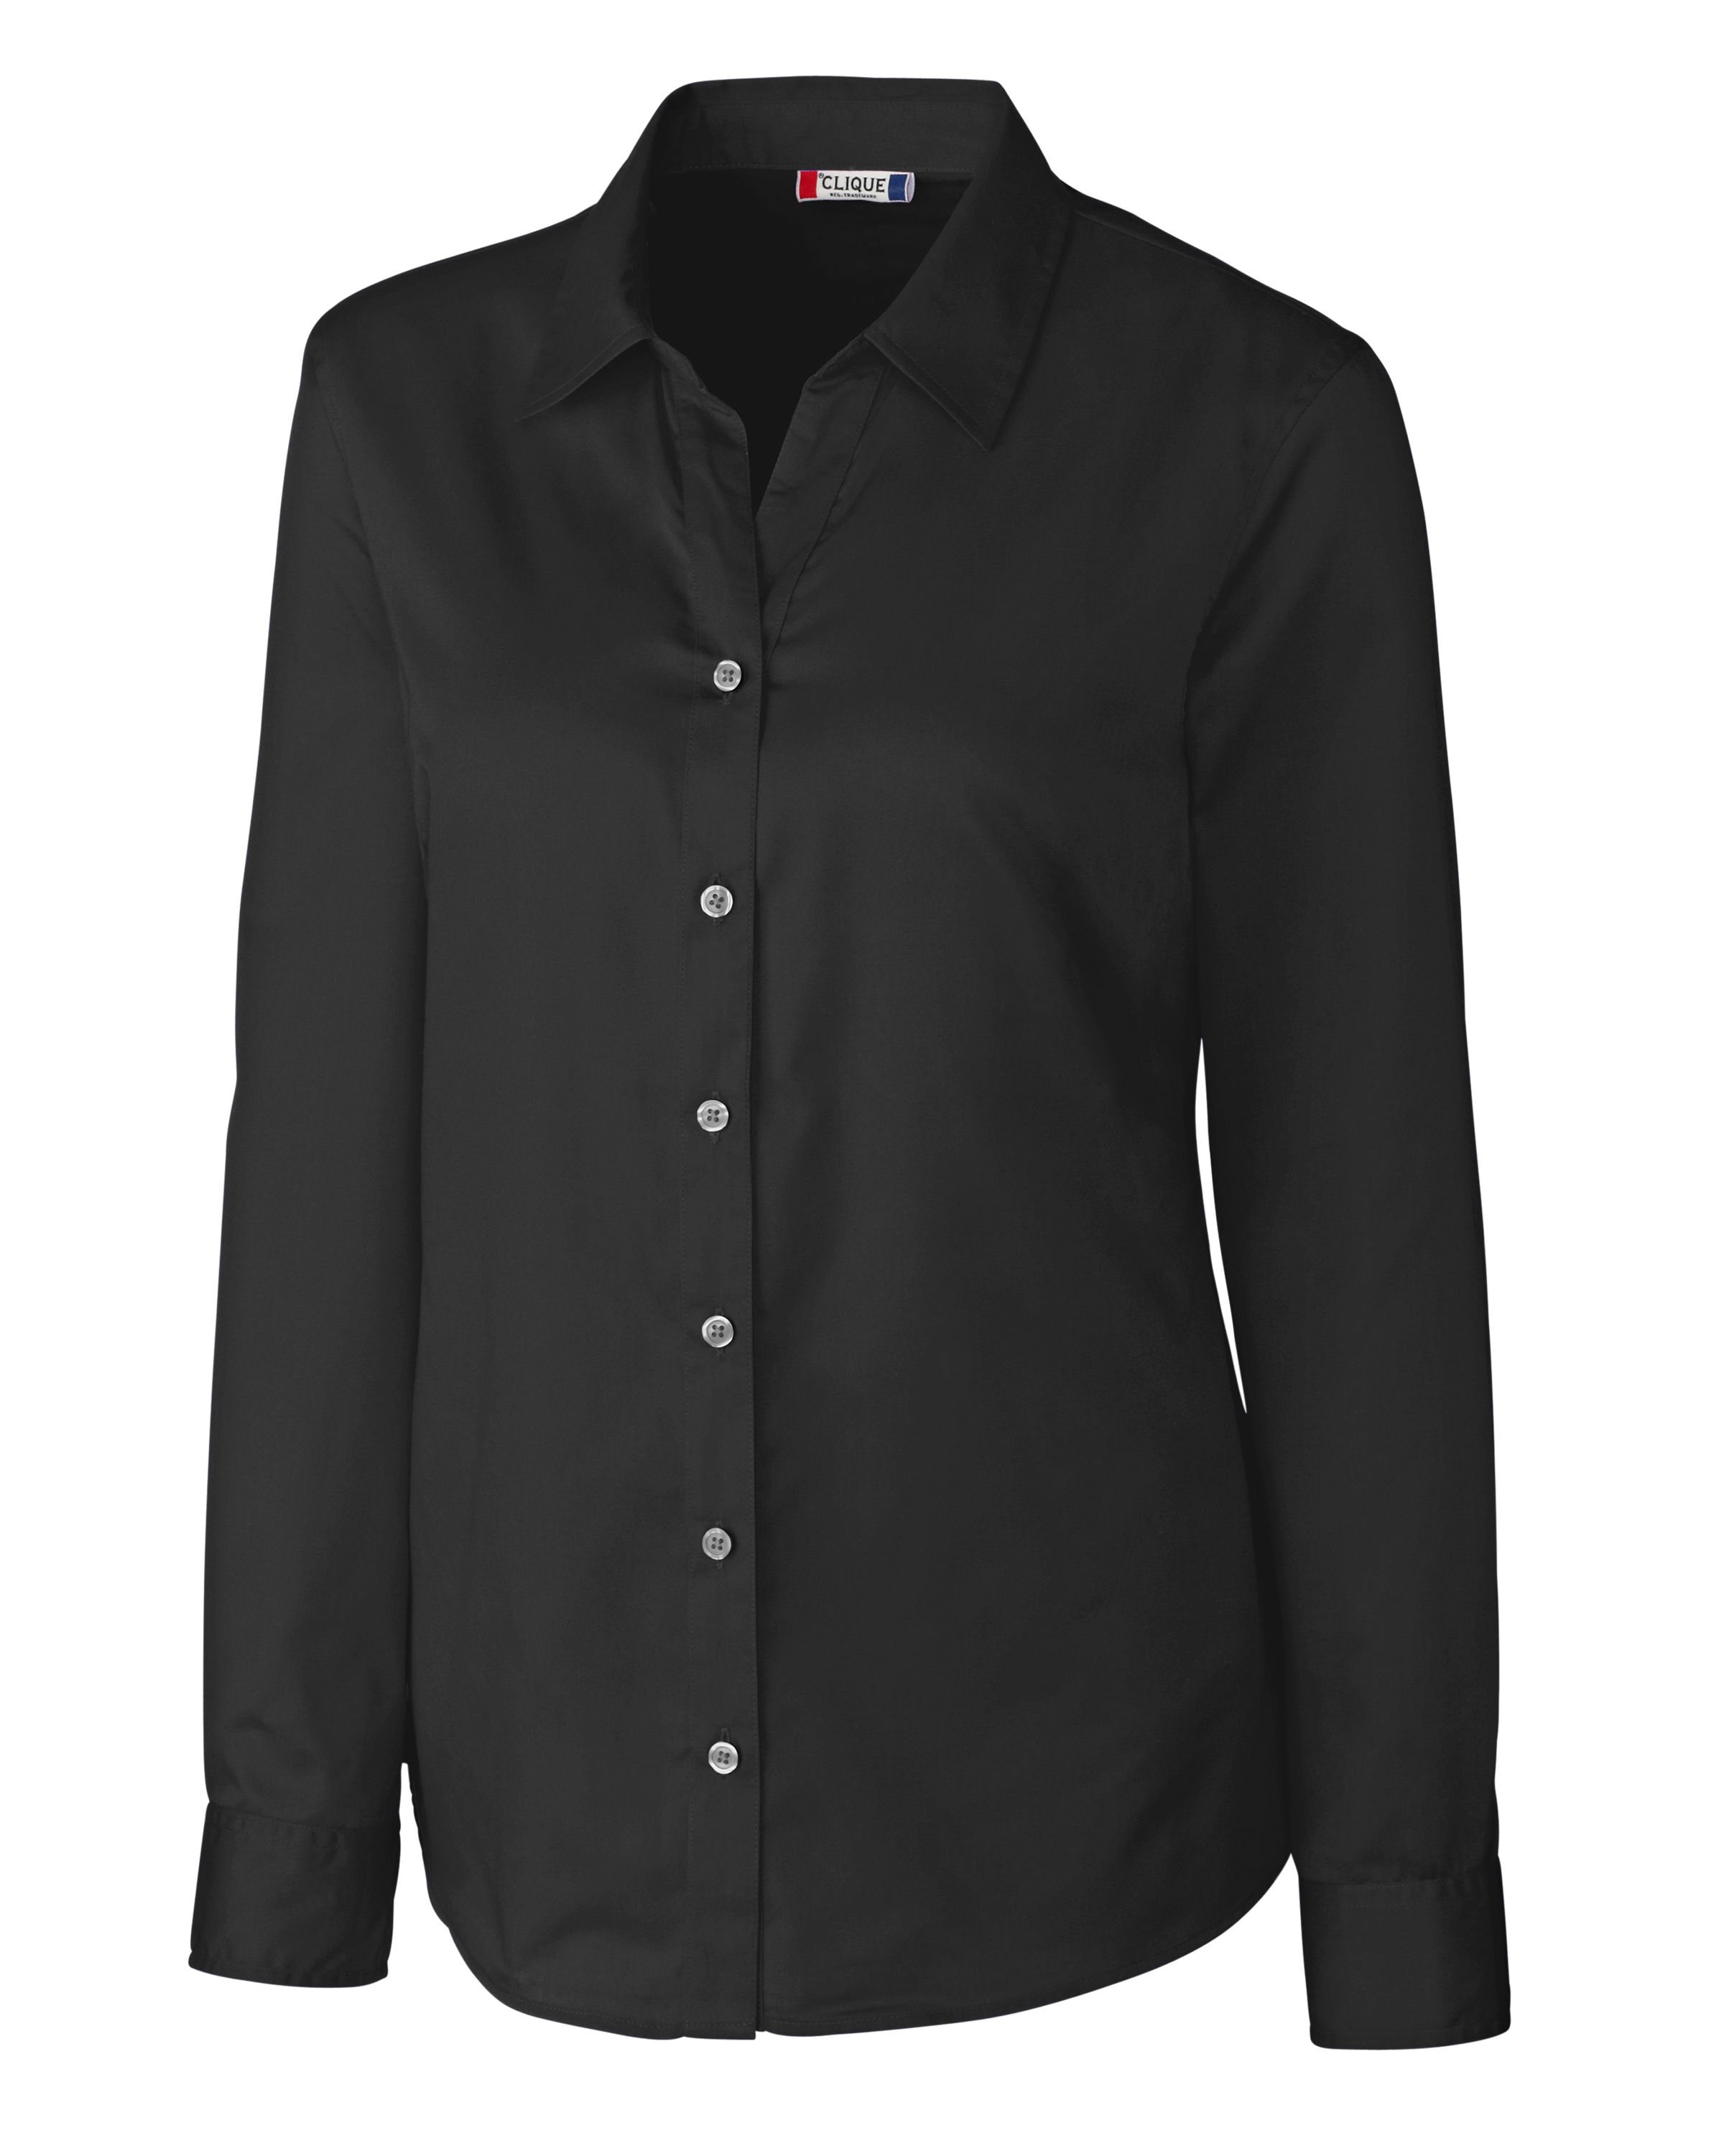 Clique Avesta Stain Resistant Womens Long Sleeve Button Down Shirt-Clique